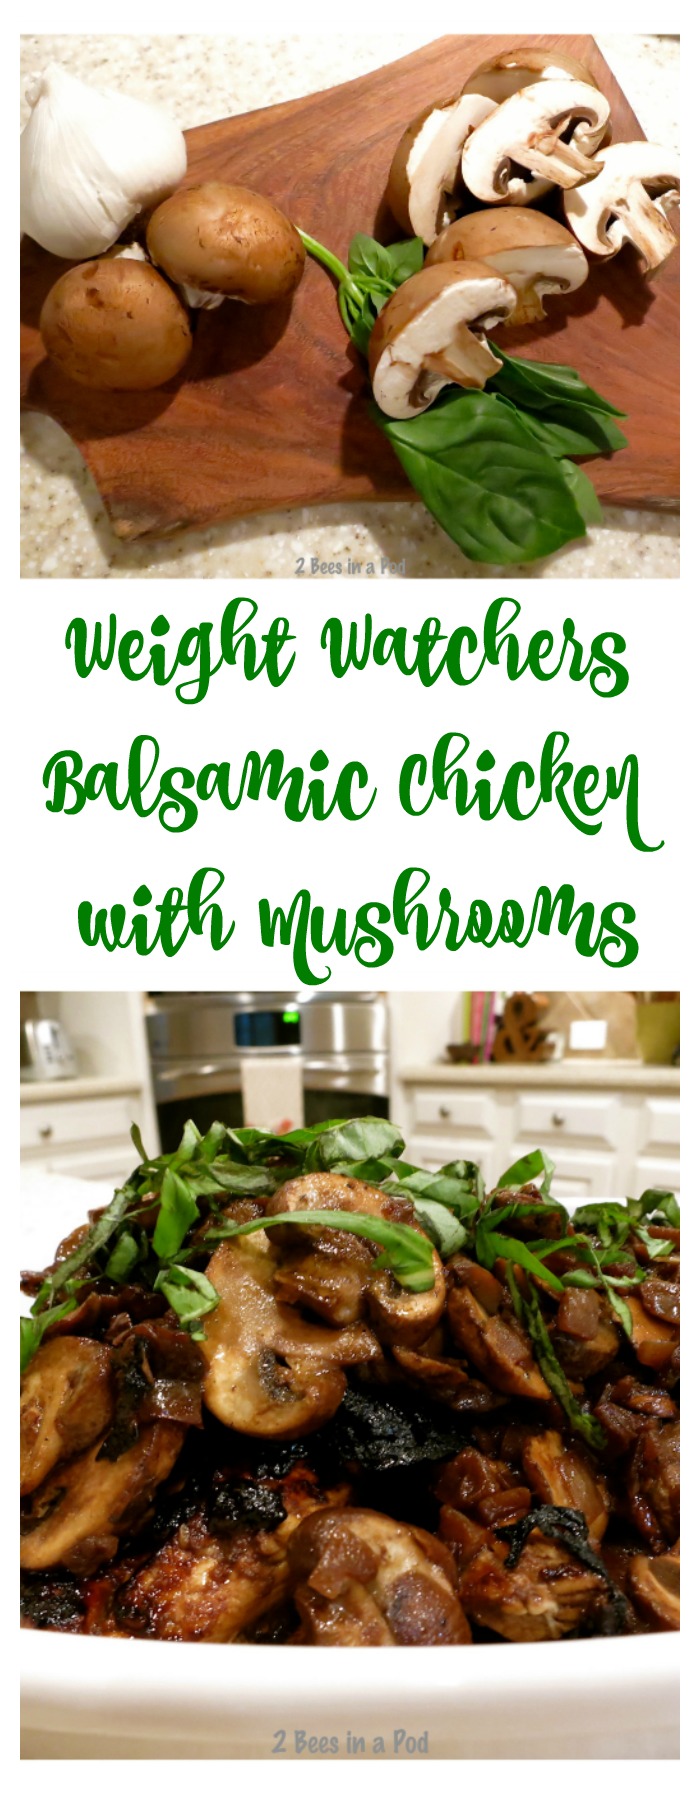 The recipe from Weight Watchers, Balsamic Chicken with Mushrooms, is so easy to make. It is also incredible flavorful, which we love!